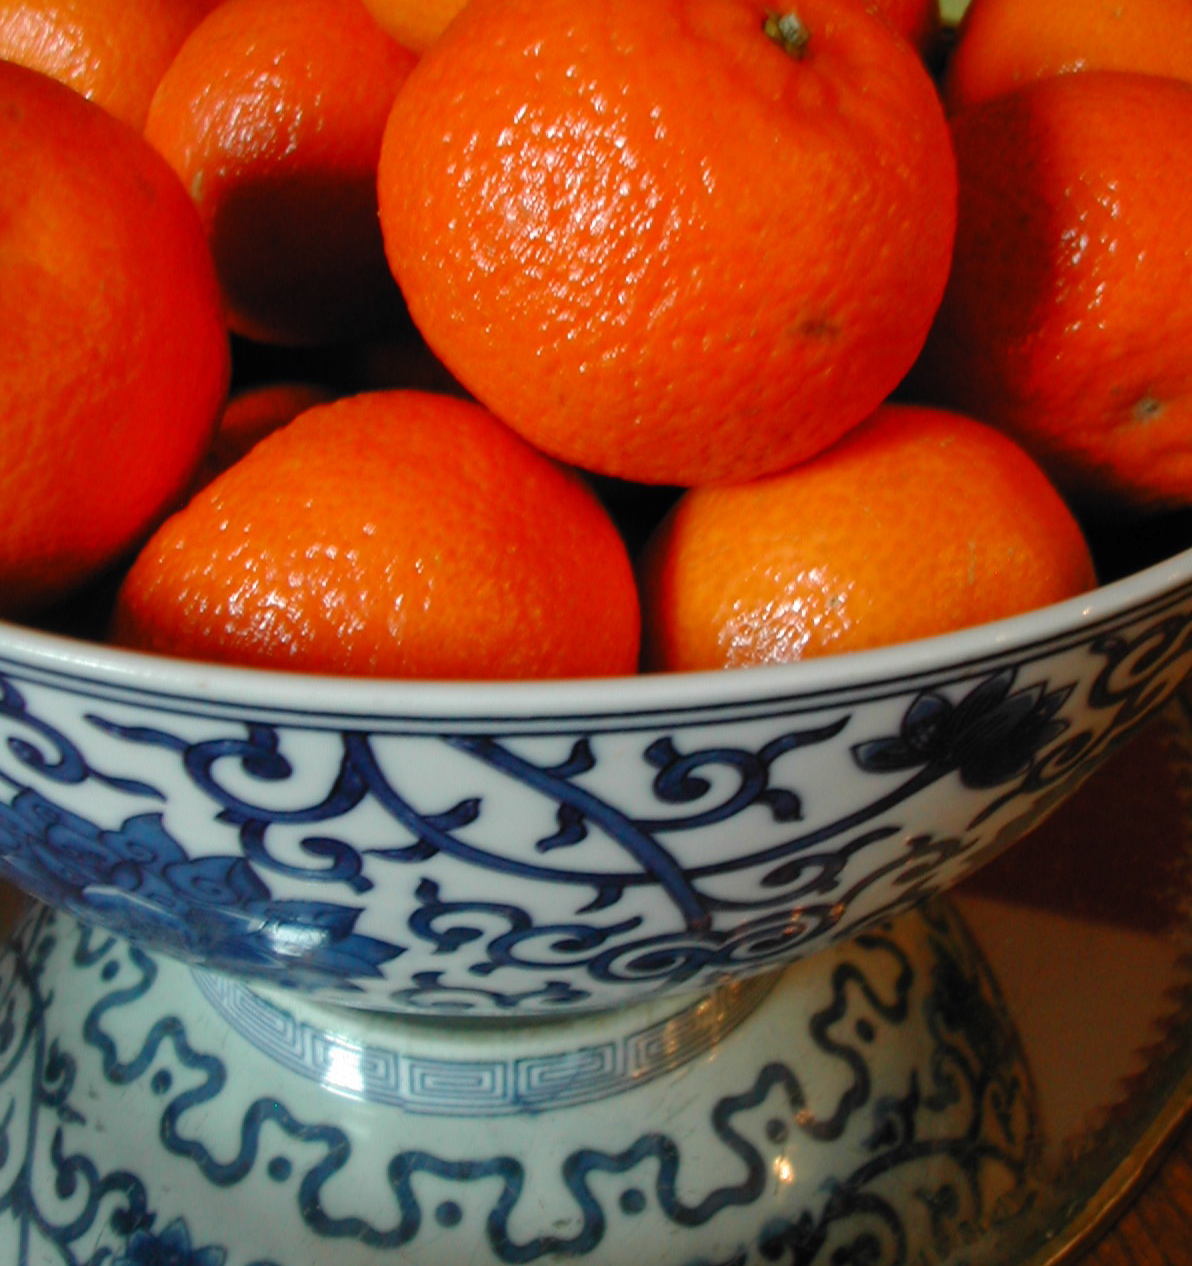 a blue and white bowl of oranges on a table